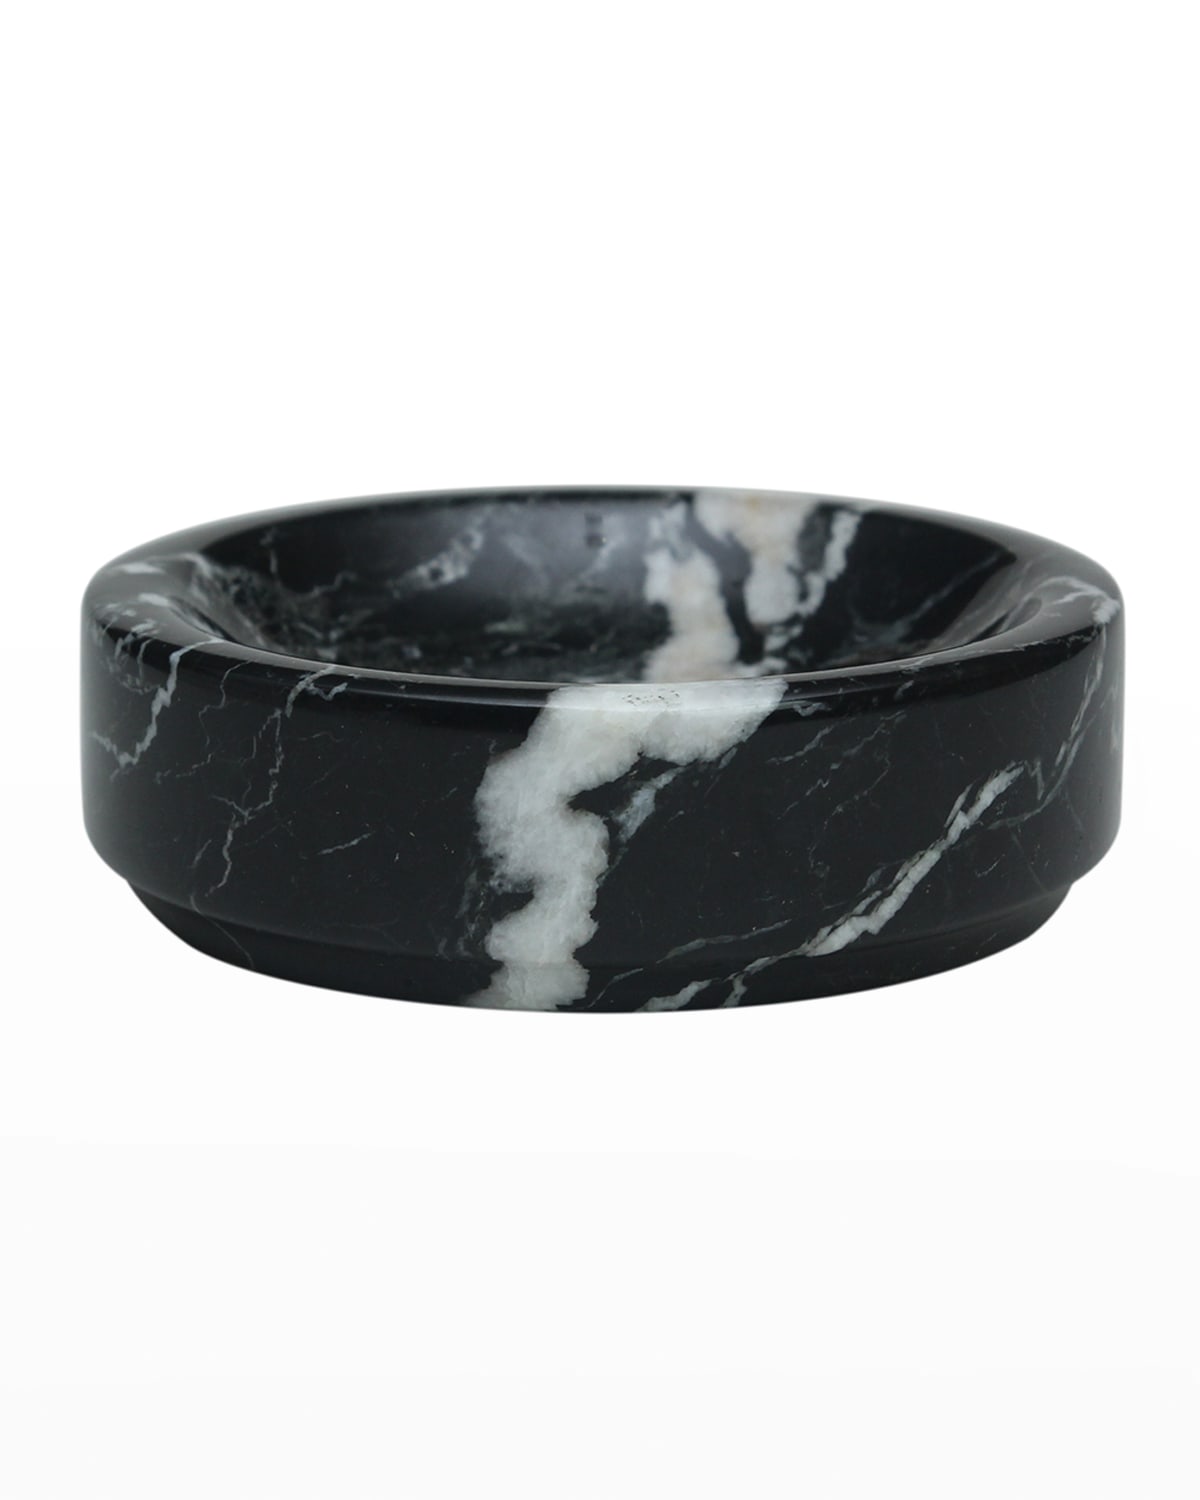 Marble Crafter Eris Collection Black Zebra Marble Soap Dish